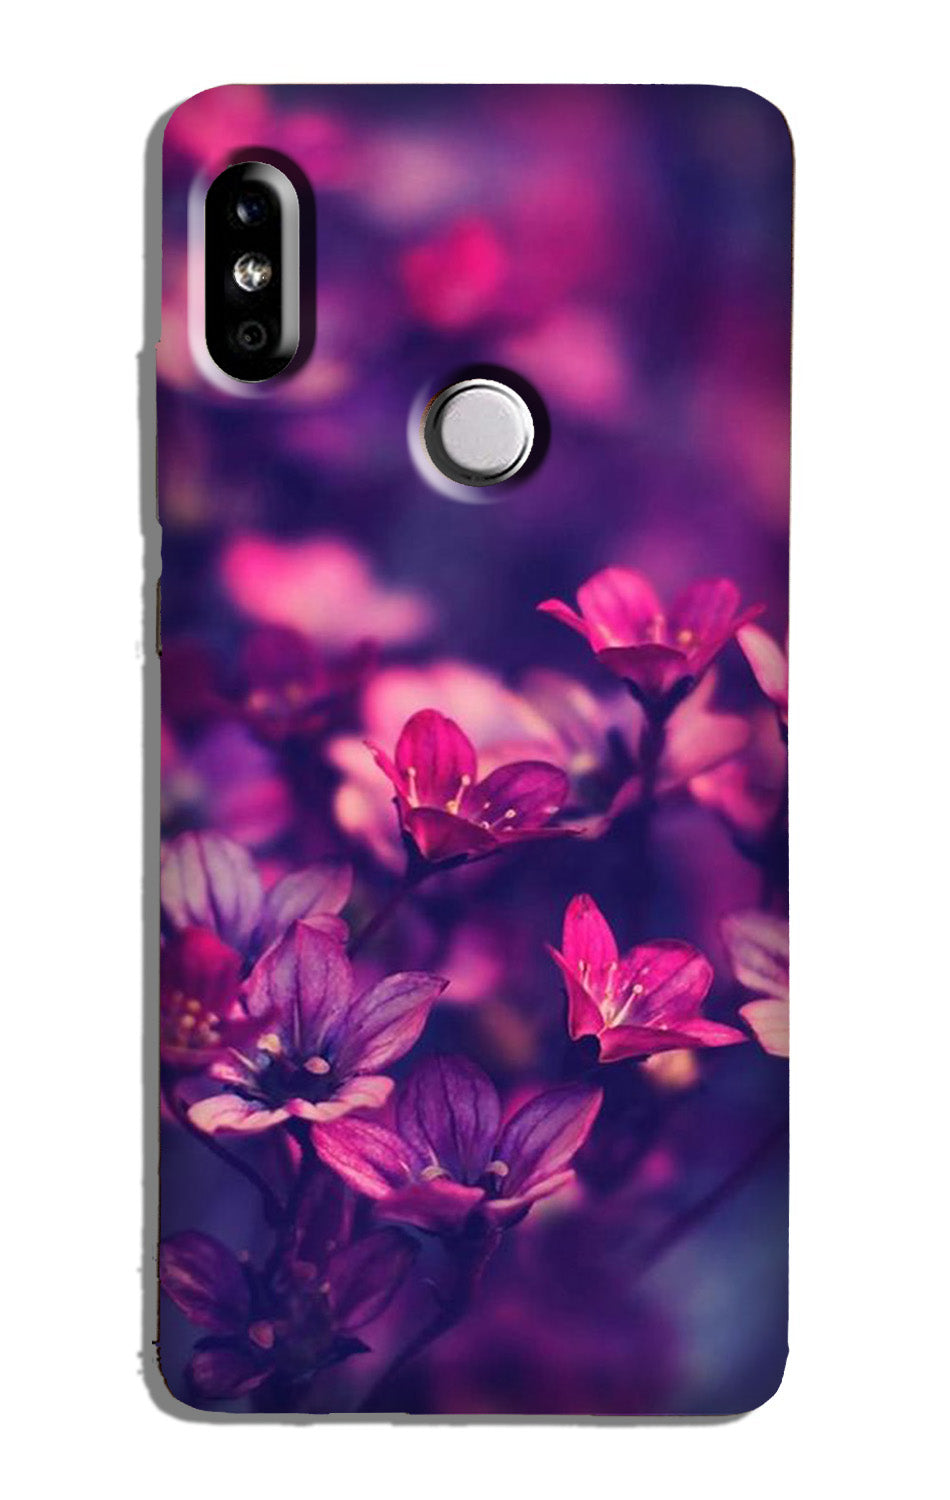 flowers Case for Redmi Note 6 Pro